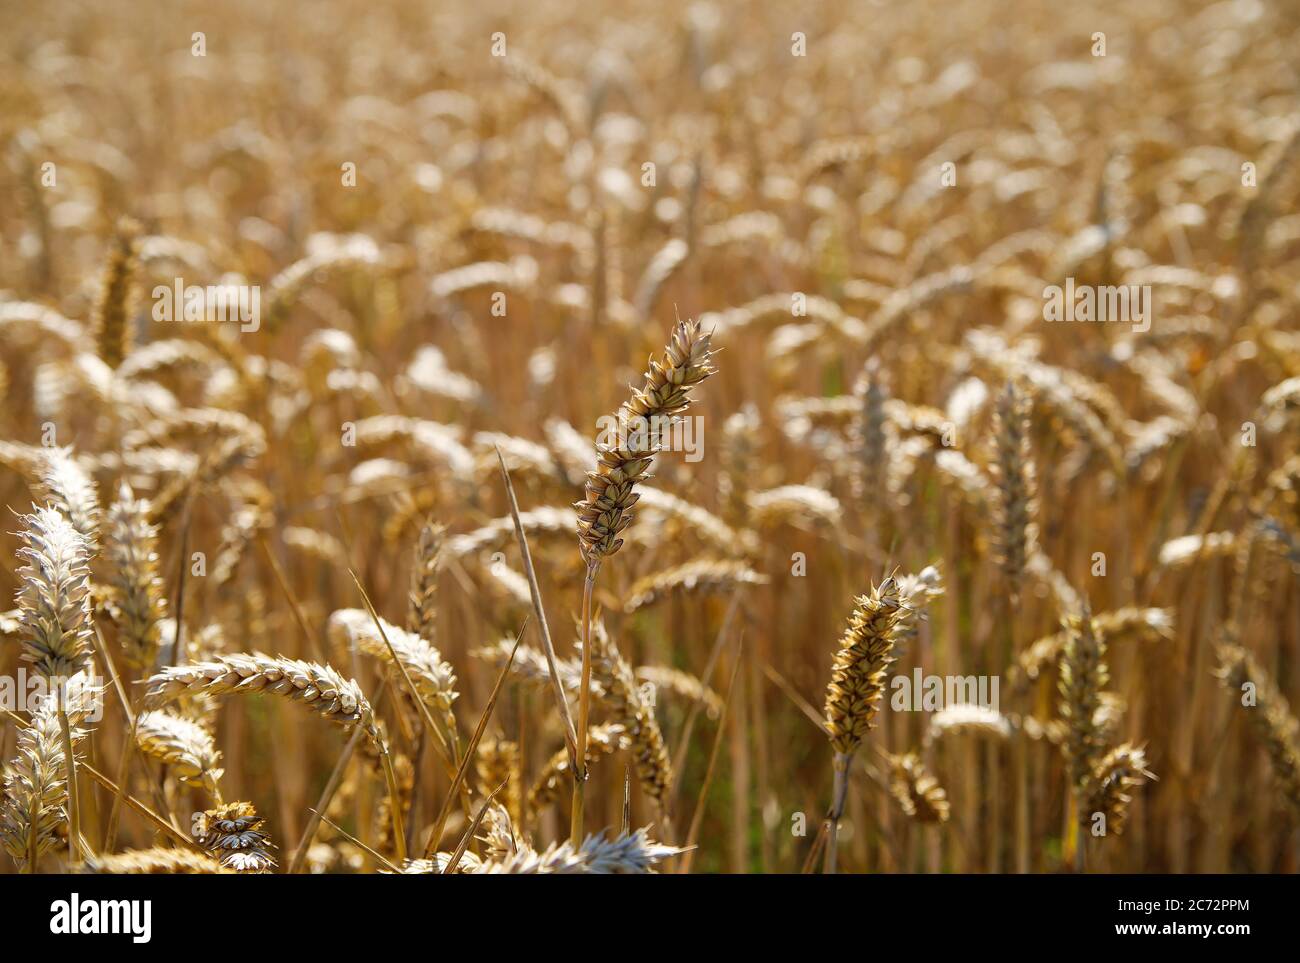 View into shiny wheat field in the early morning sun - Germany Stock Photo